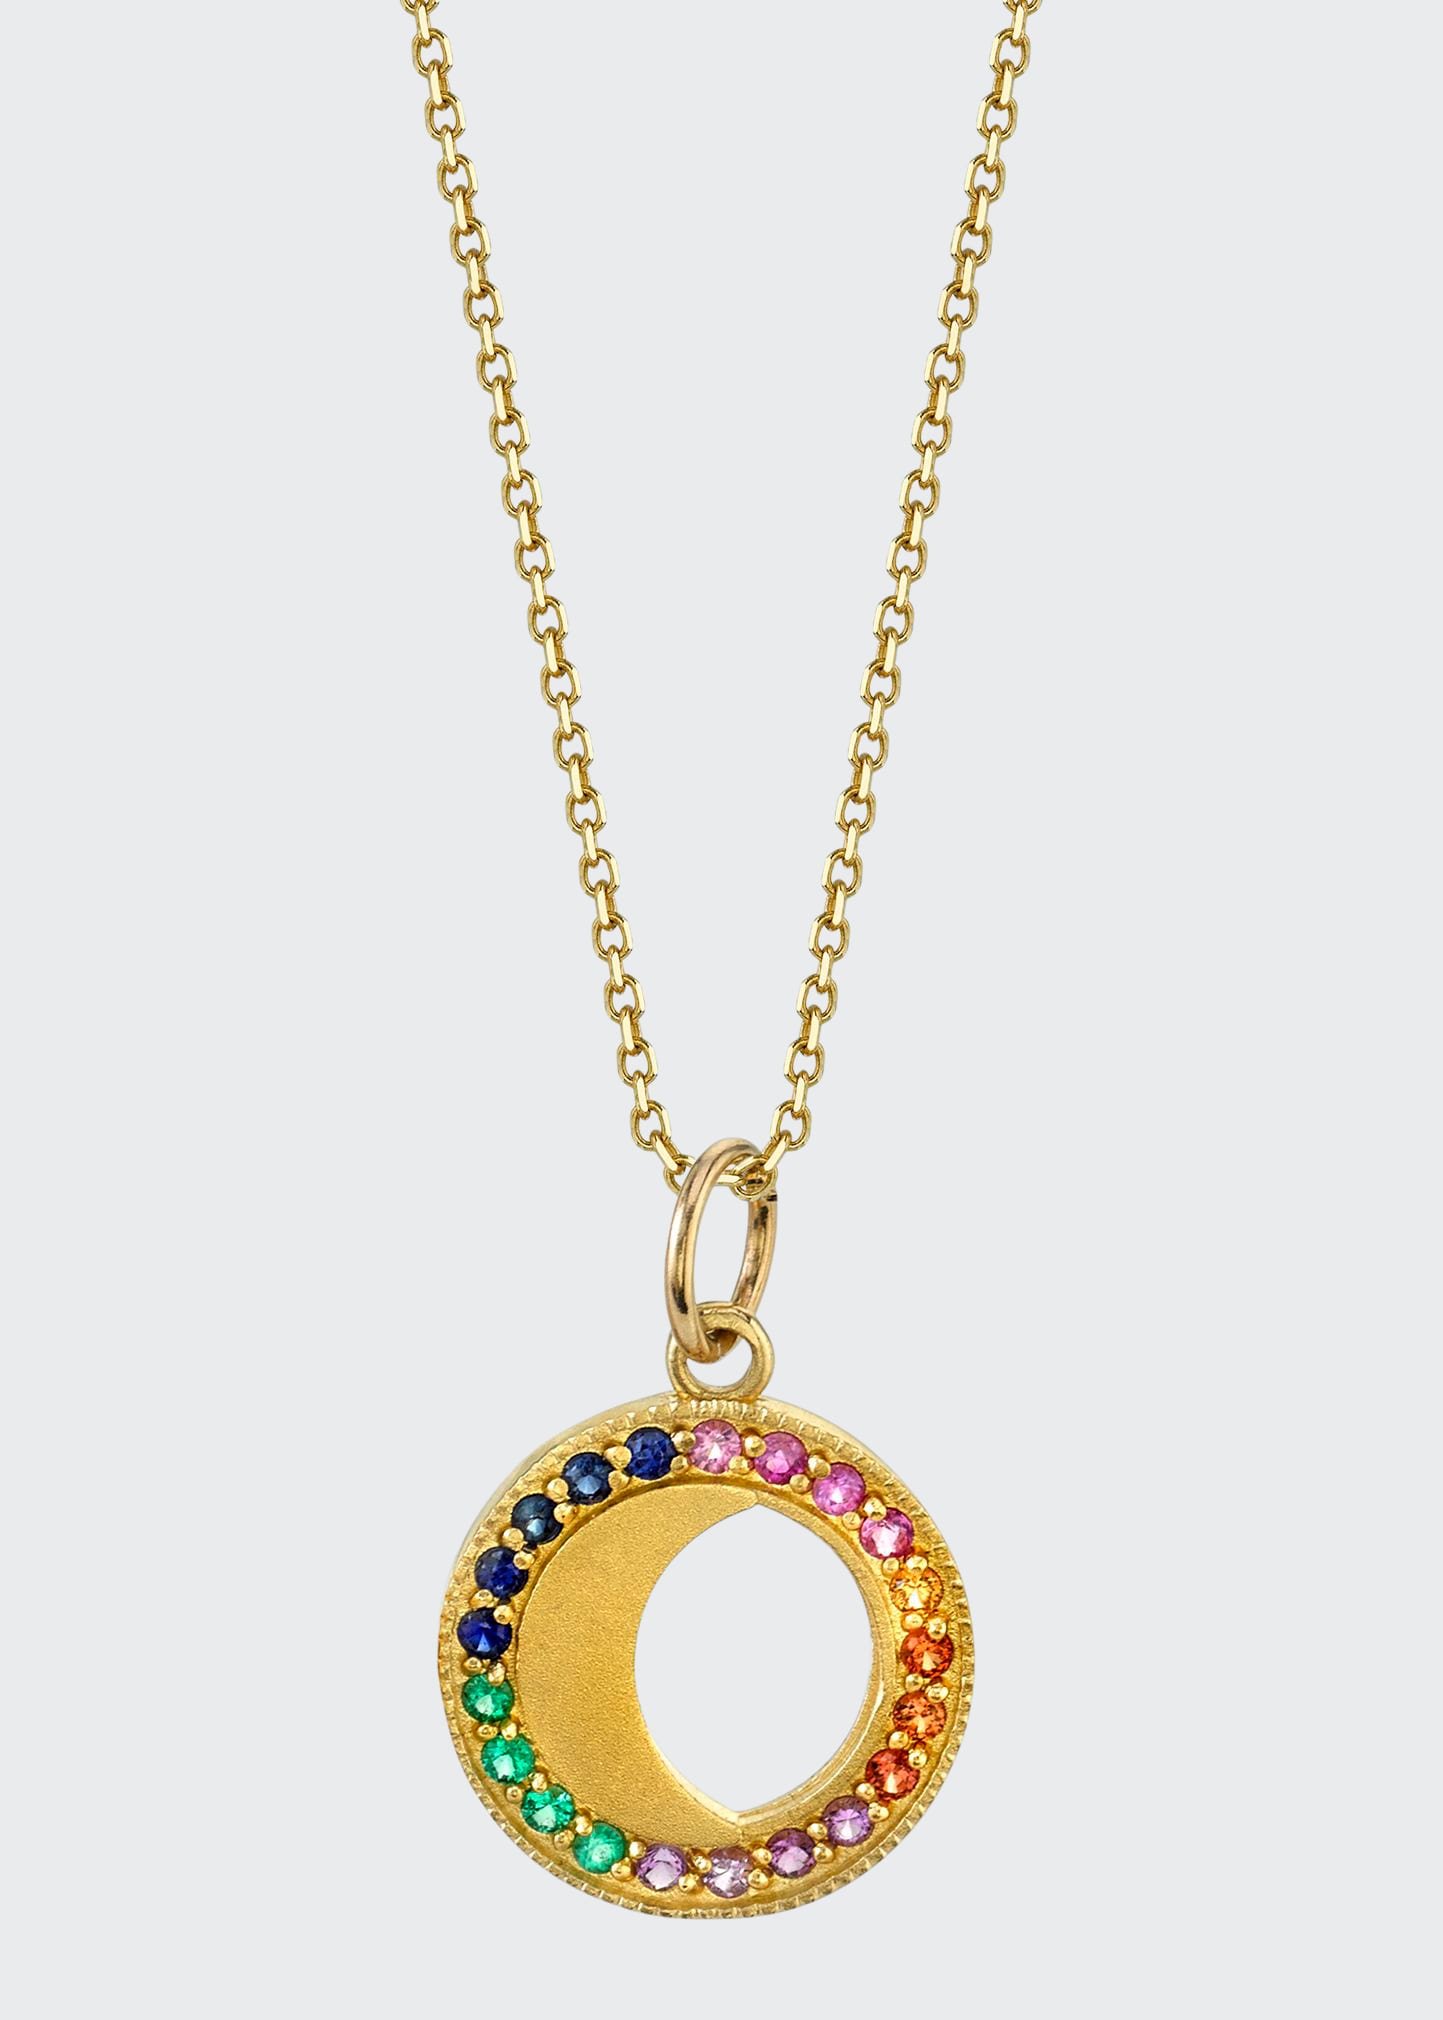 Andrea Fohrman Waning Waxing Moon Phase Multi-sapphire Necklace